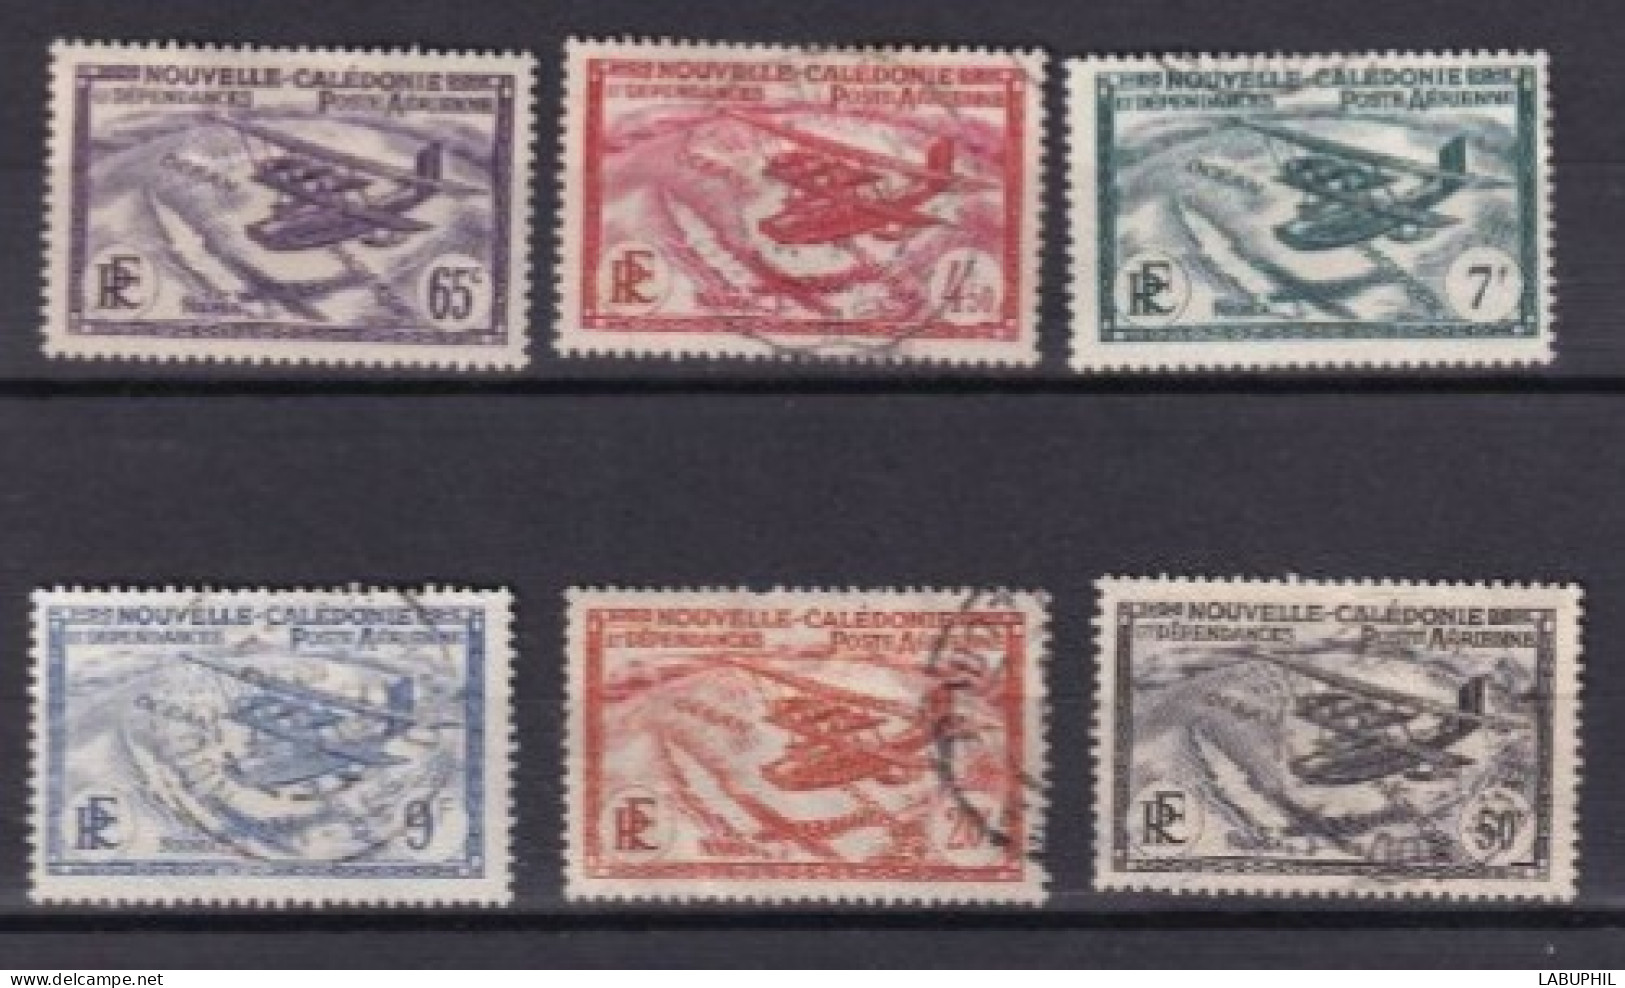 NOUVELLE CALEDONIE Dispersion D'une Collection Oblitéré Used  1938 - Used Stamps